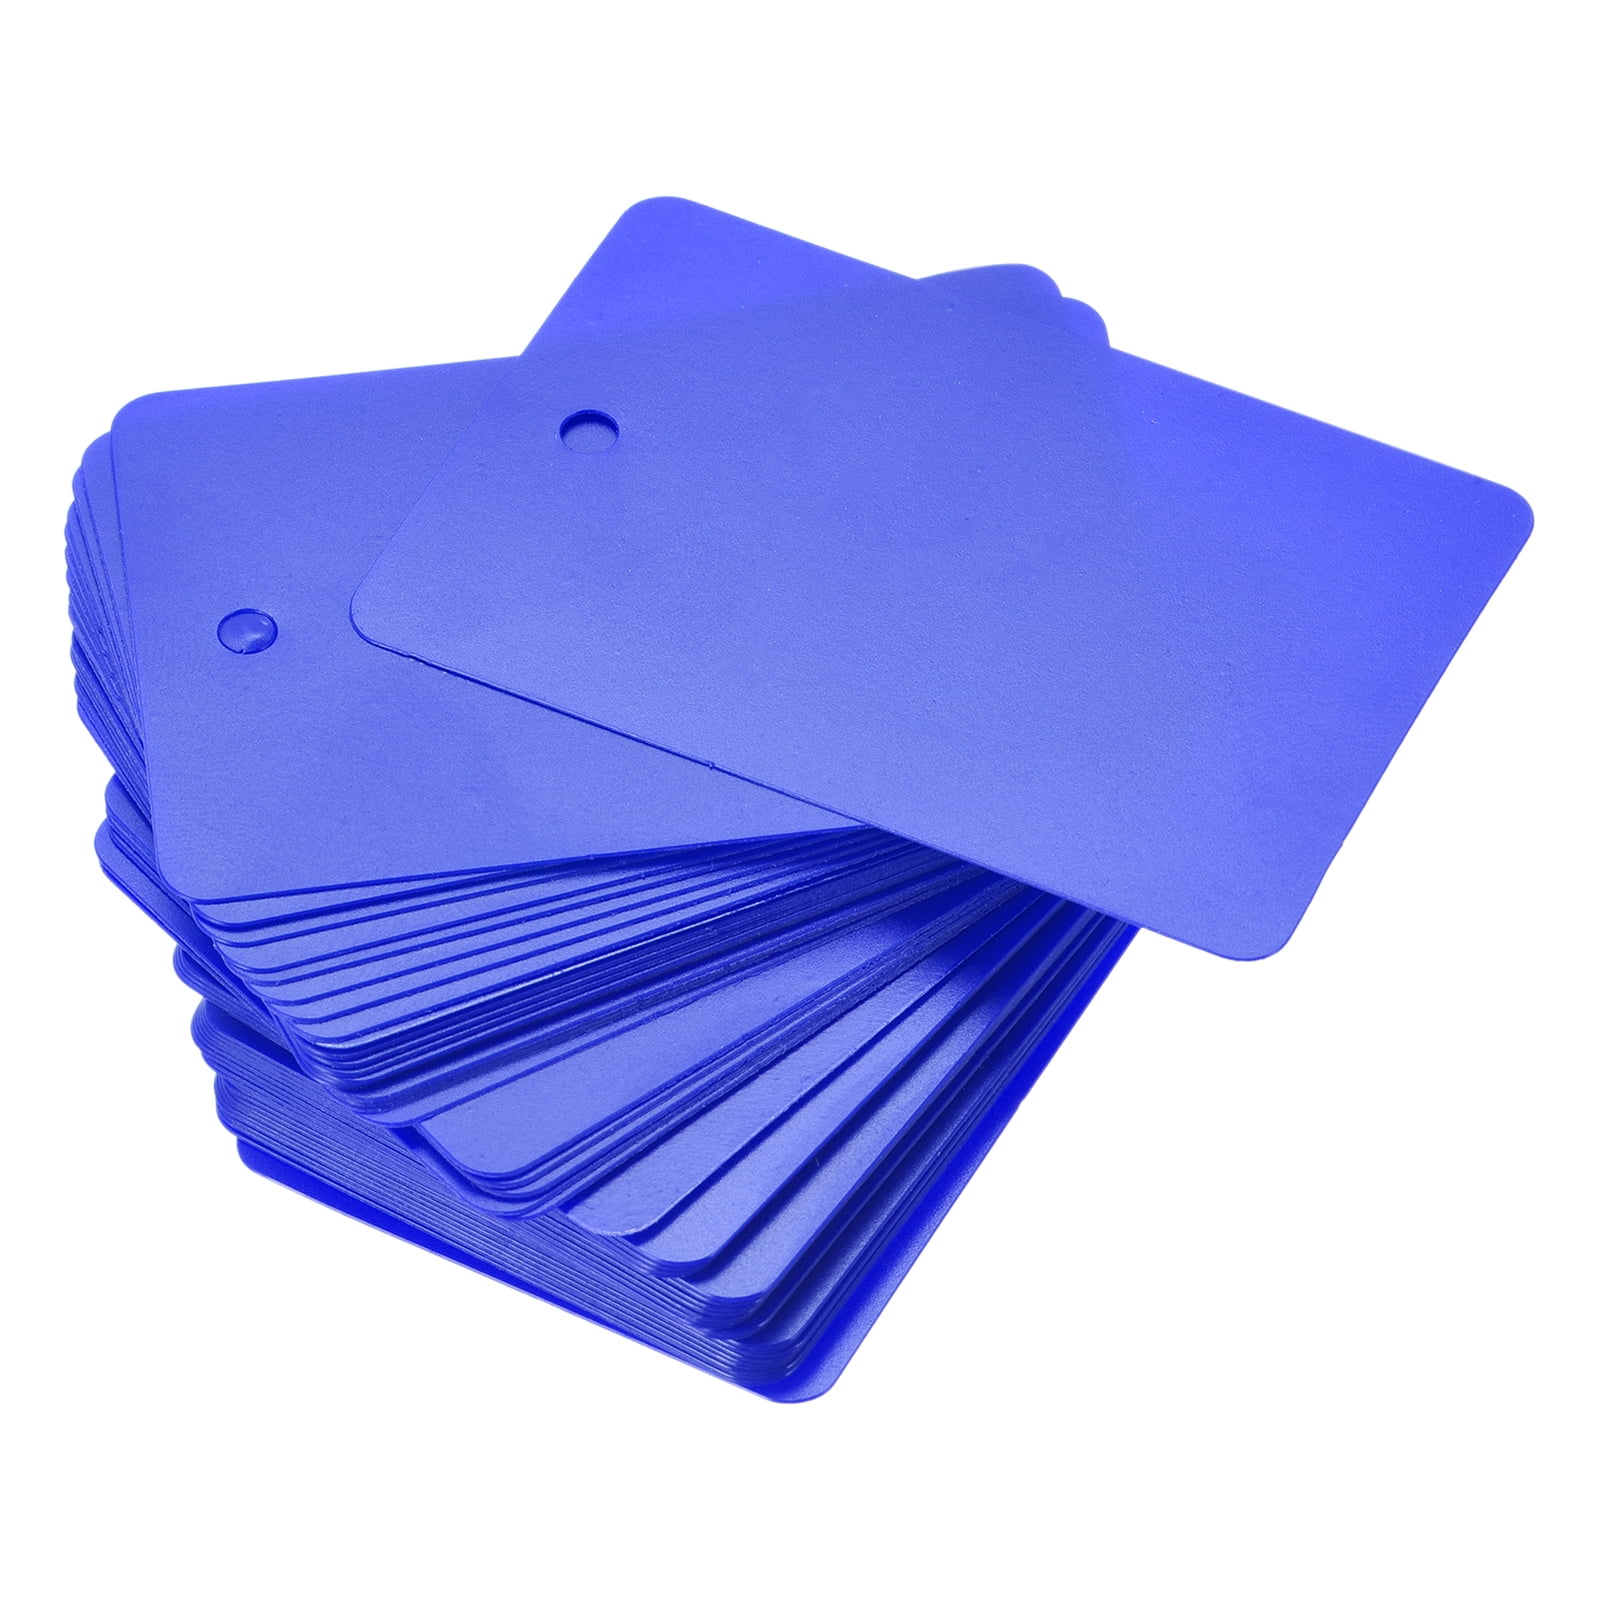  100 Plastic Tags Shipping Tags Water Proof Tags for